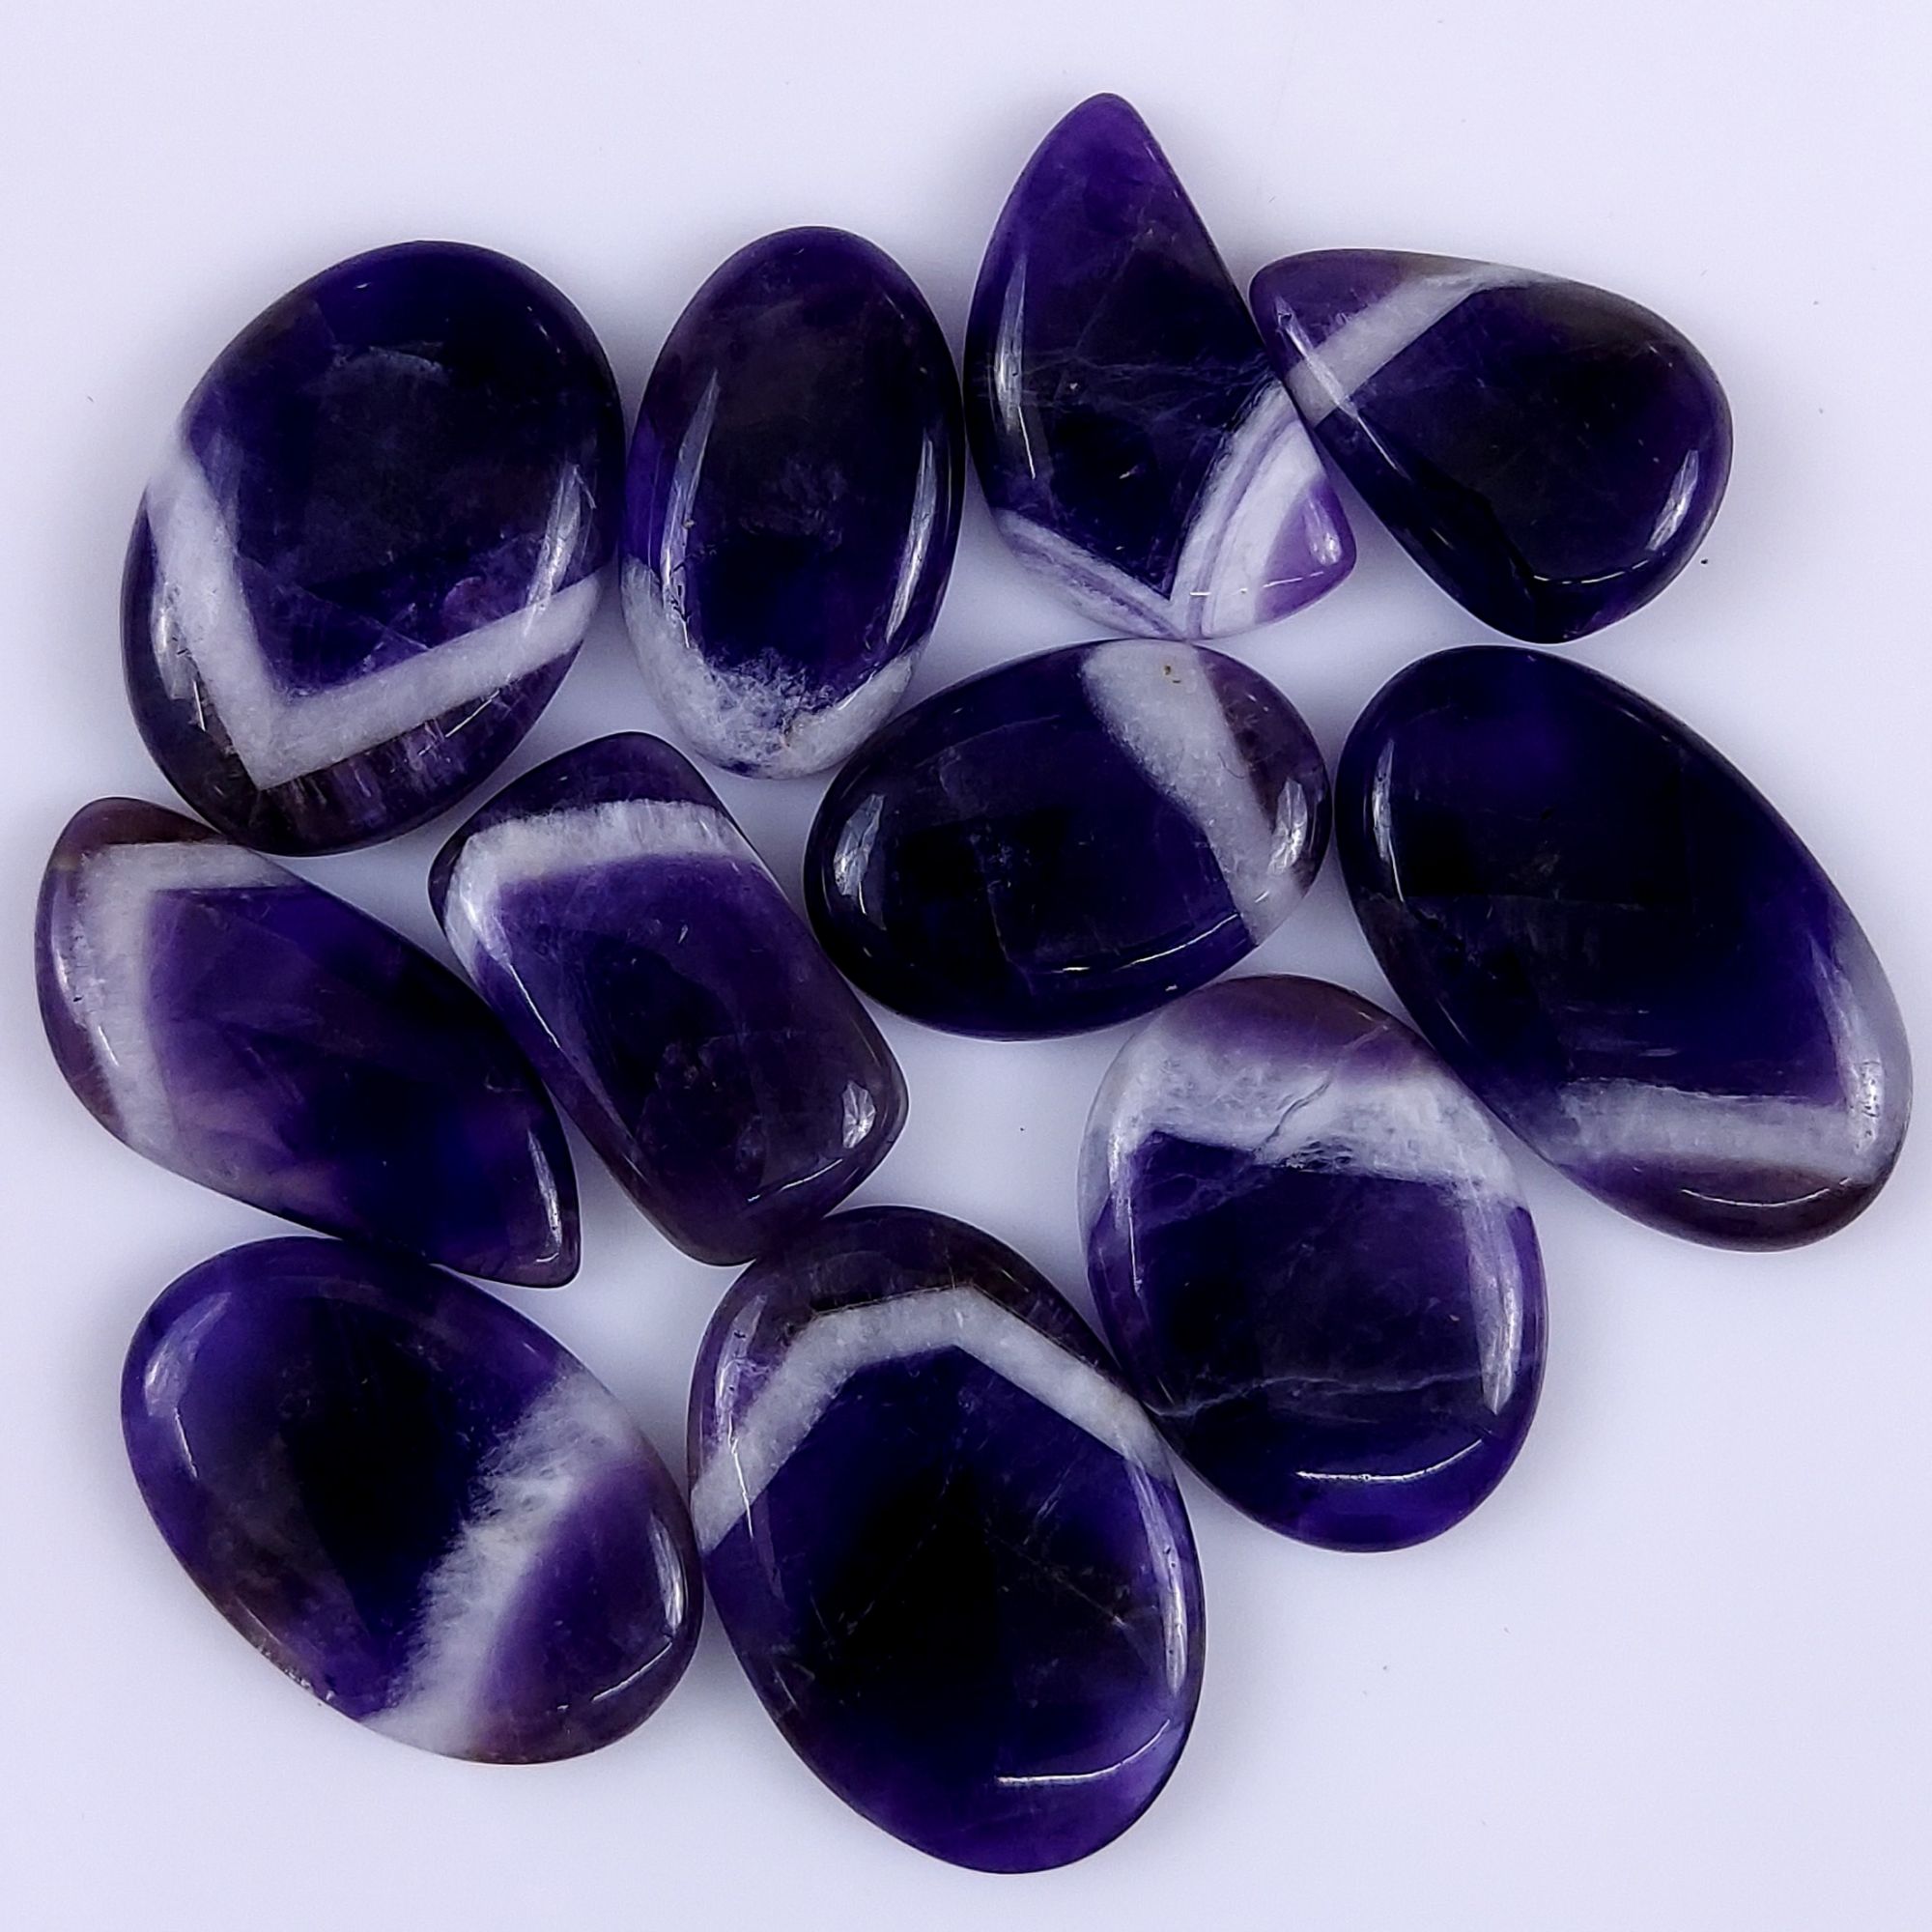 11Pcs 312Cts Natural Amethyst Cabochon lot Gemstone Purple Crystal Mix Shape Loose Gemstone beads for jewelry Making 34x22 22x15mm#7514